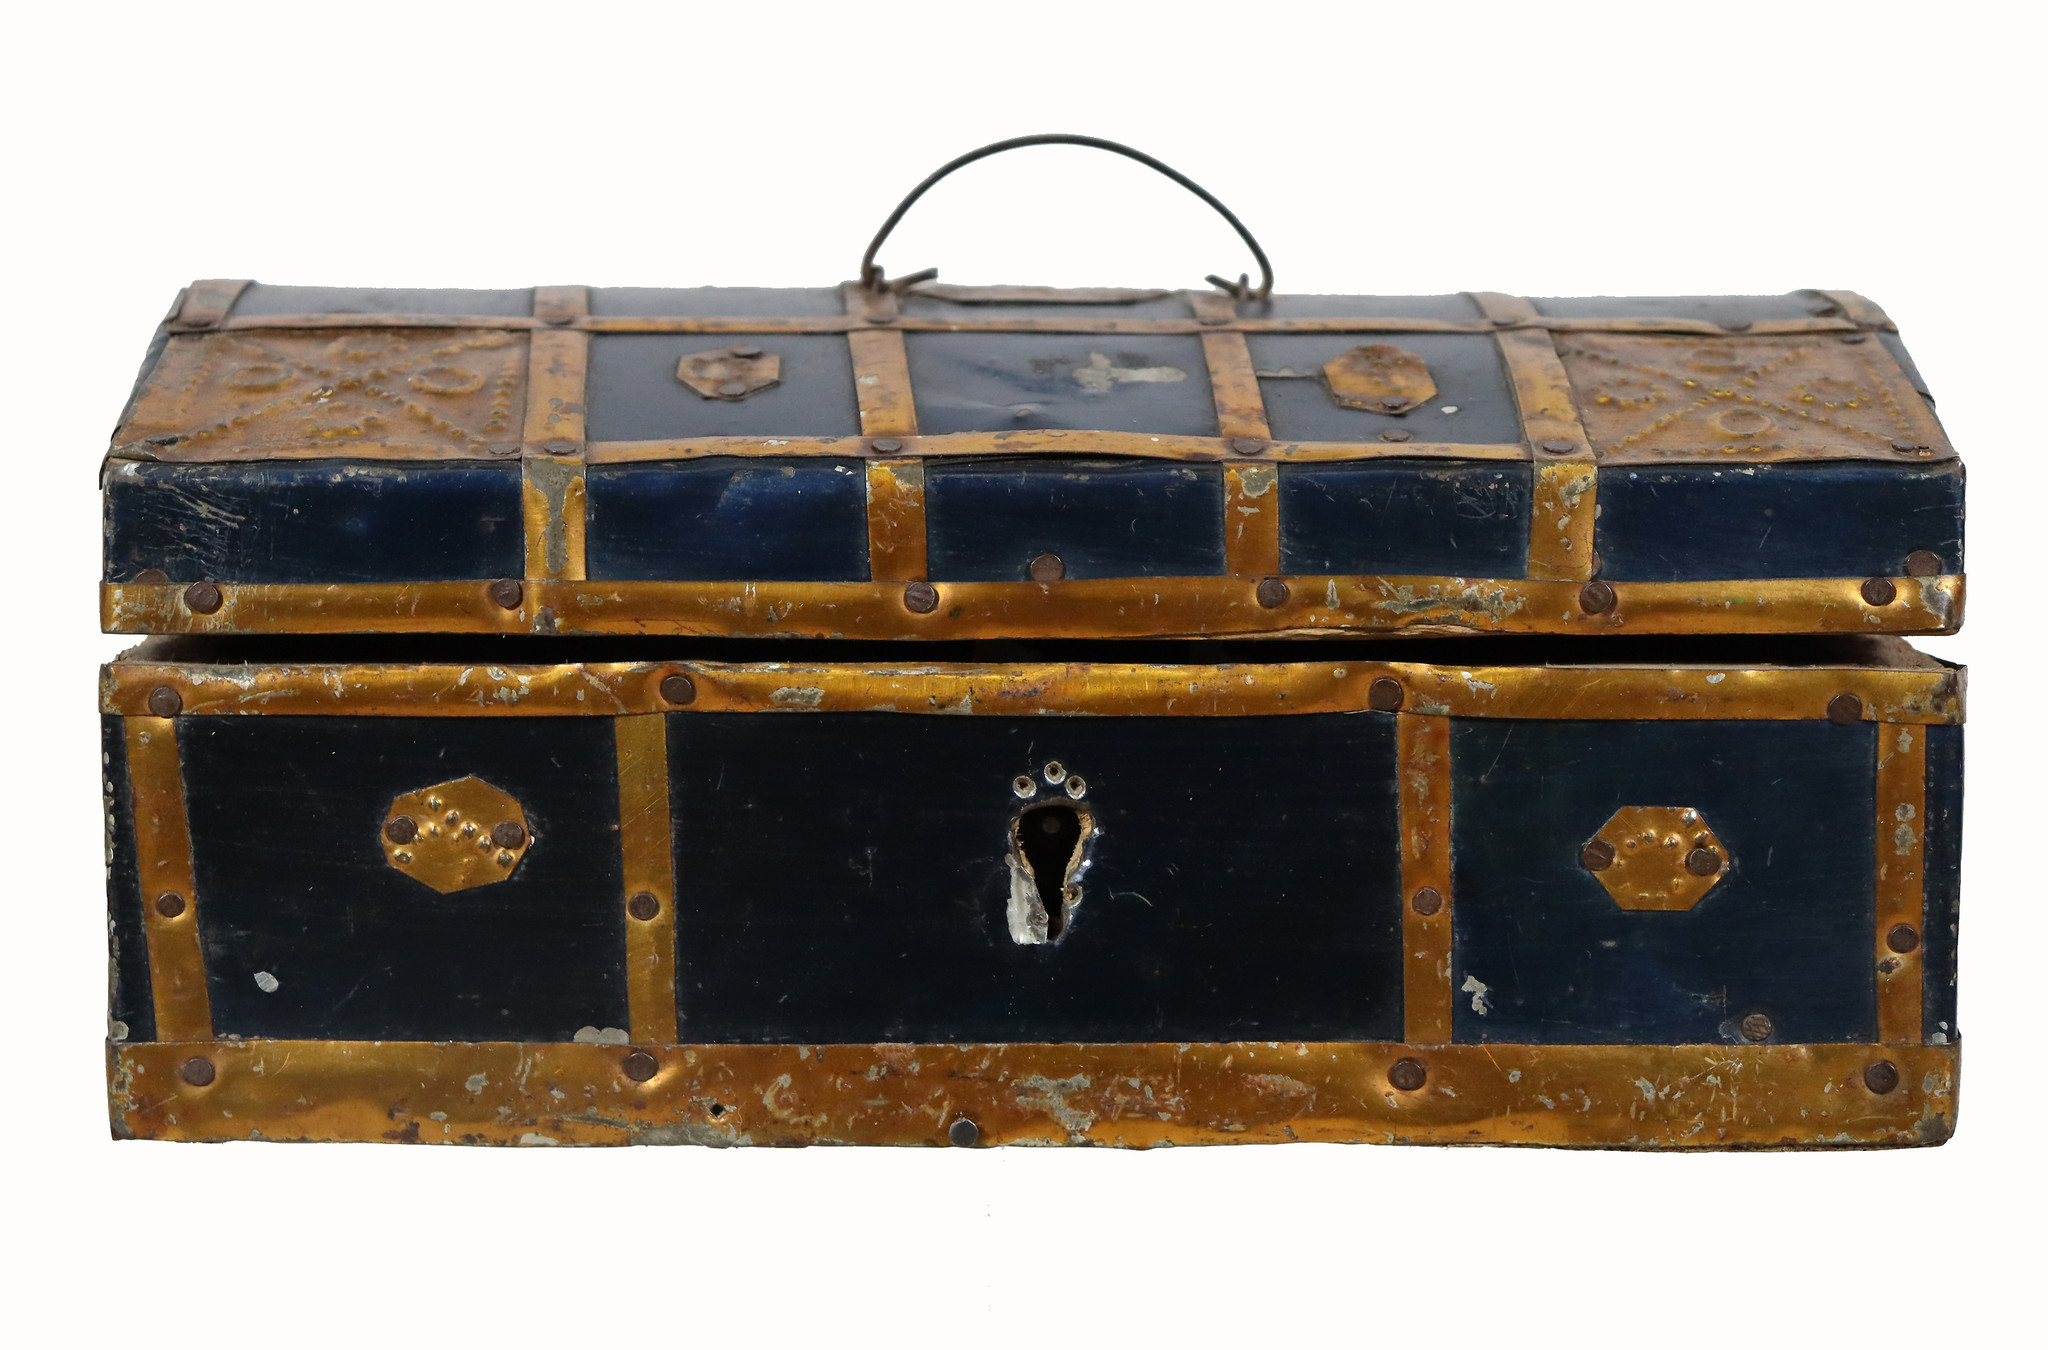 Antique richly decorated chest jewelry chest treasure chest early 19th century Afghanistan turkmenistan